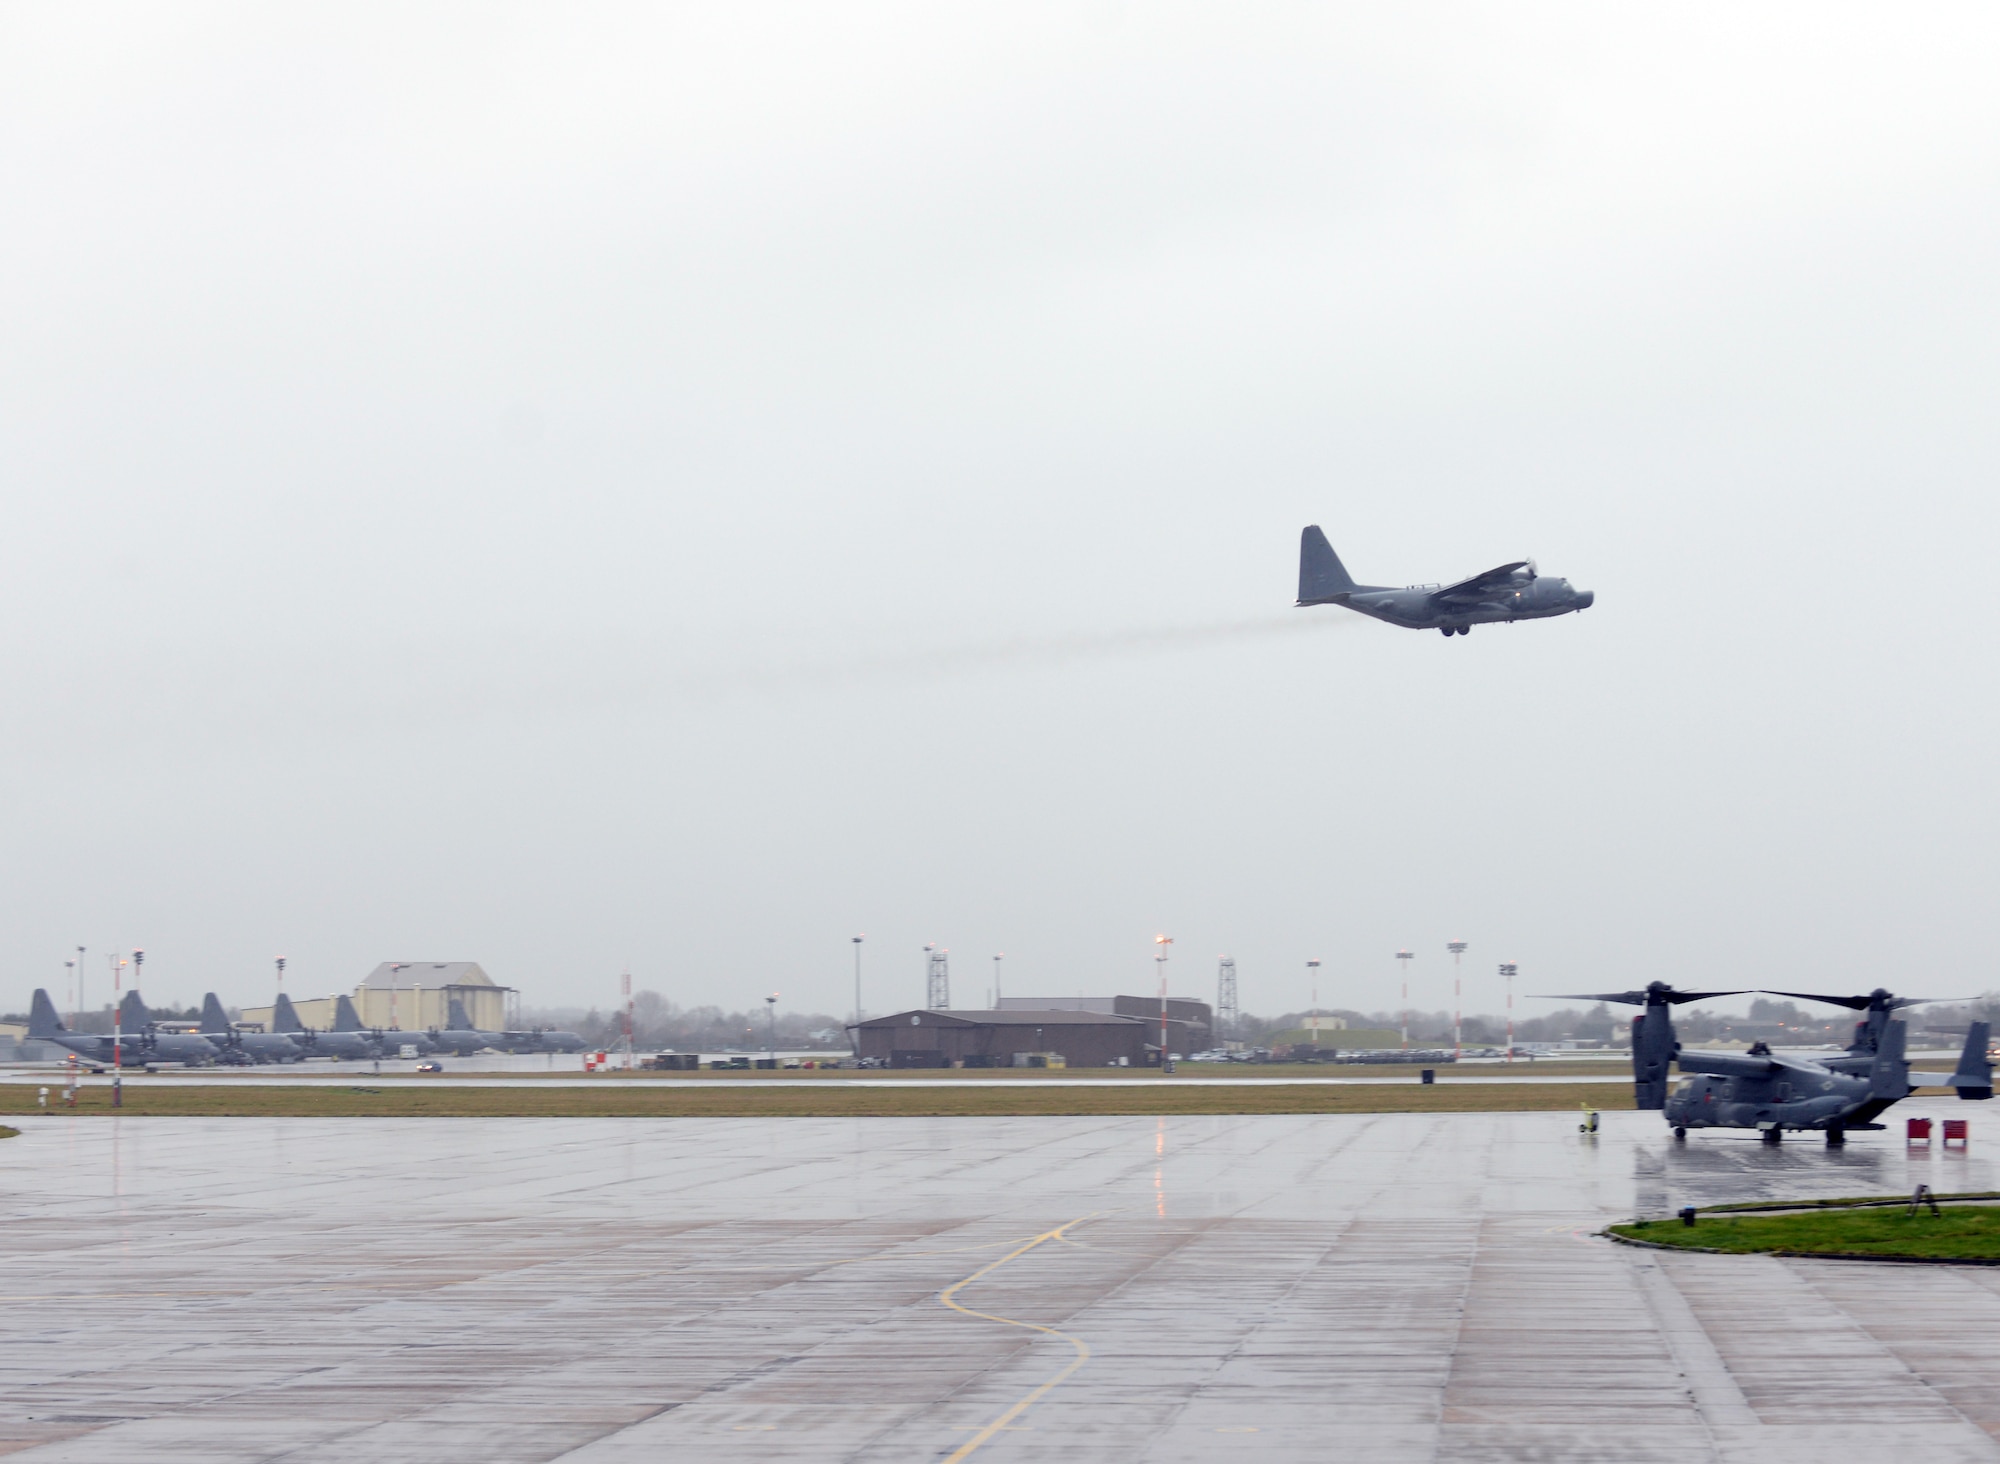 The final MC-130H Combat Talon II departs RAF Mildenhall for Hurlburt Field, Fla., Jan. 8, 2015. This departure flight concludes its tenure at the 7th Special Operations Squadron at RAF Mildenhall. The MC-130H, tail number 0195, is the last of its kind to leave the European theater. (U.S. Air Force photo by Tech. Sgt. Stacia Zachary/Released)